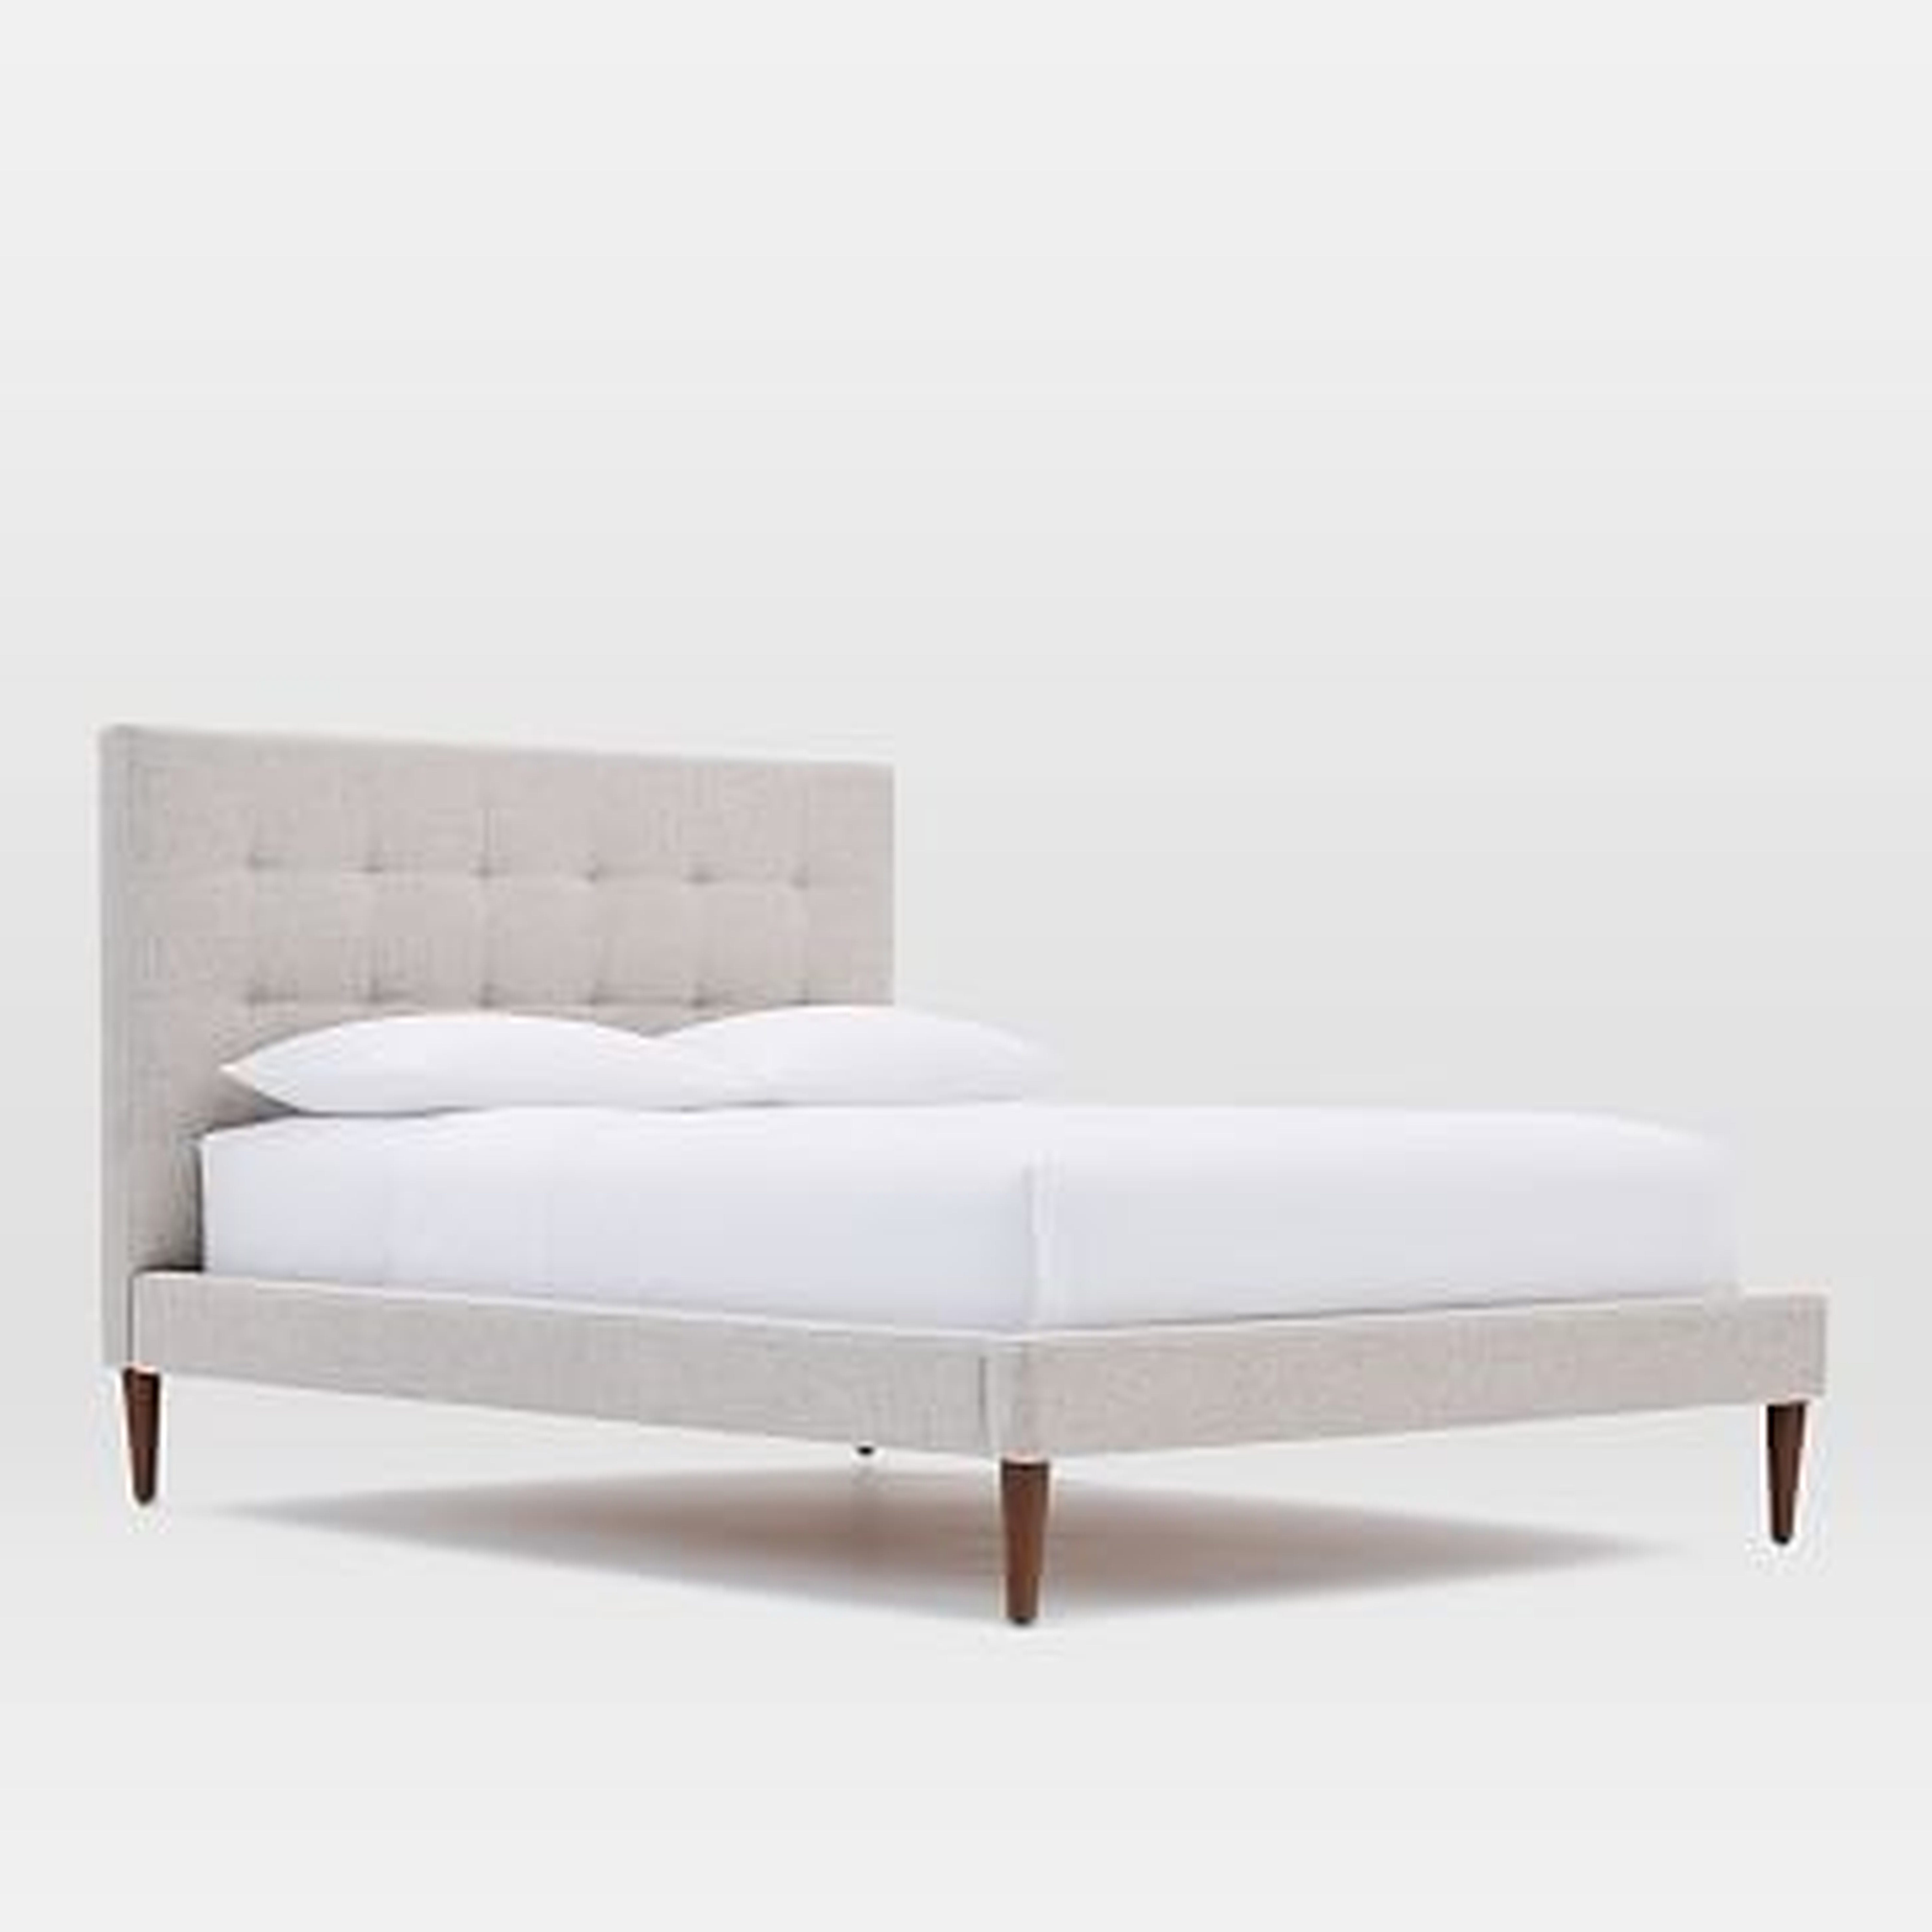 Grid Tufted Tapered Leg - Low - King, Twill, Stone - West Elm